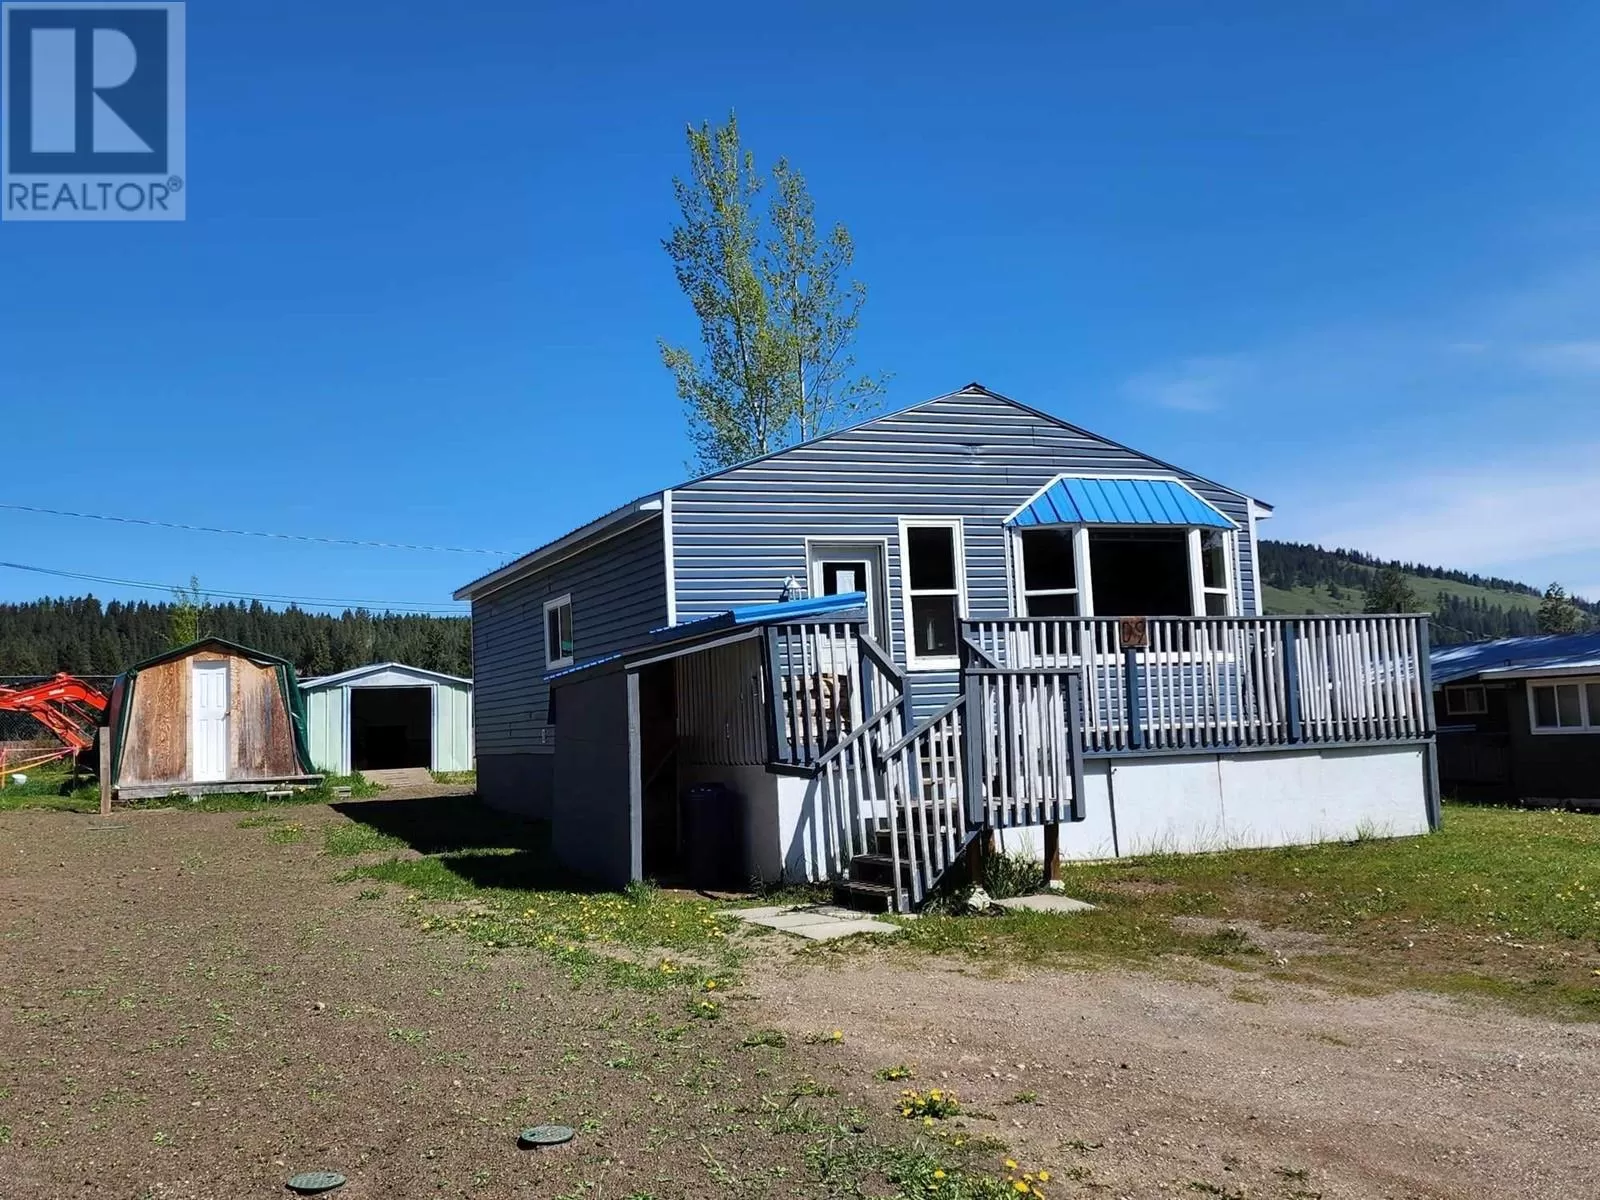 Manufactured Home for rent: 446 Mabel Lake Road Unit# D9, Lumby, British Columbia V0E 2G5